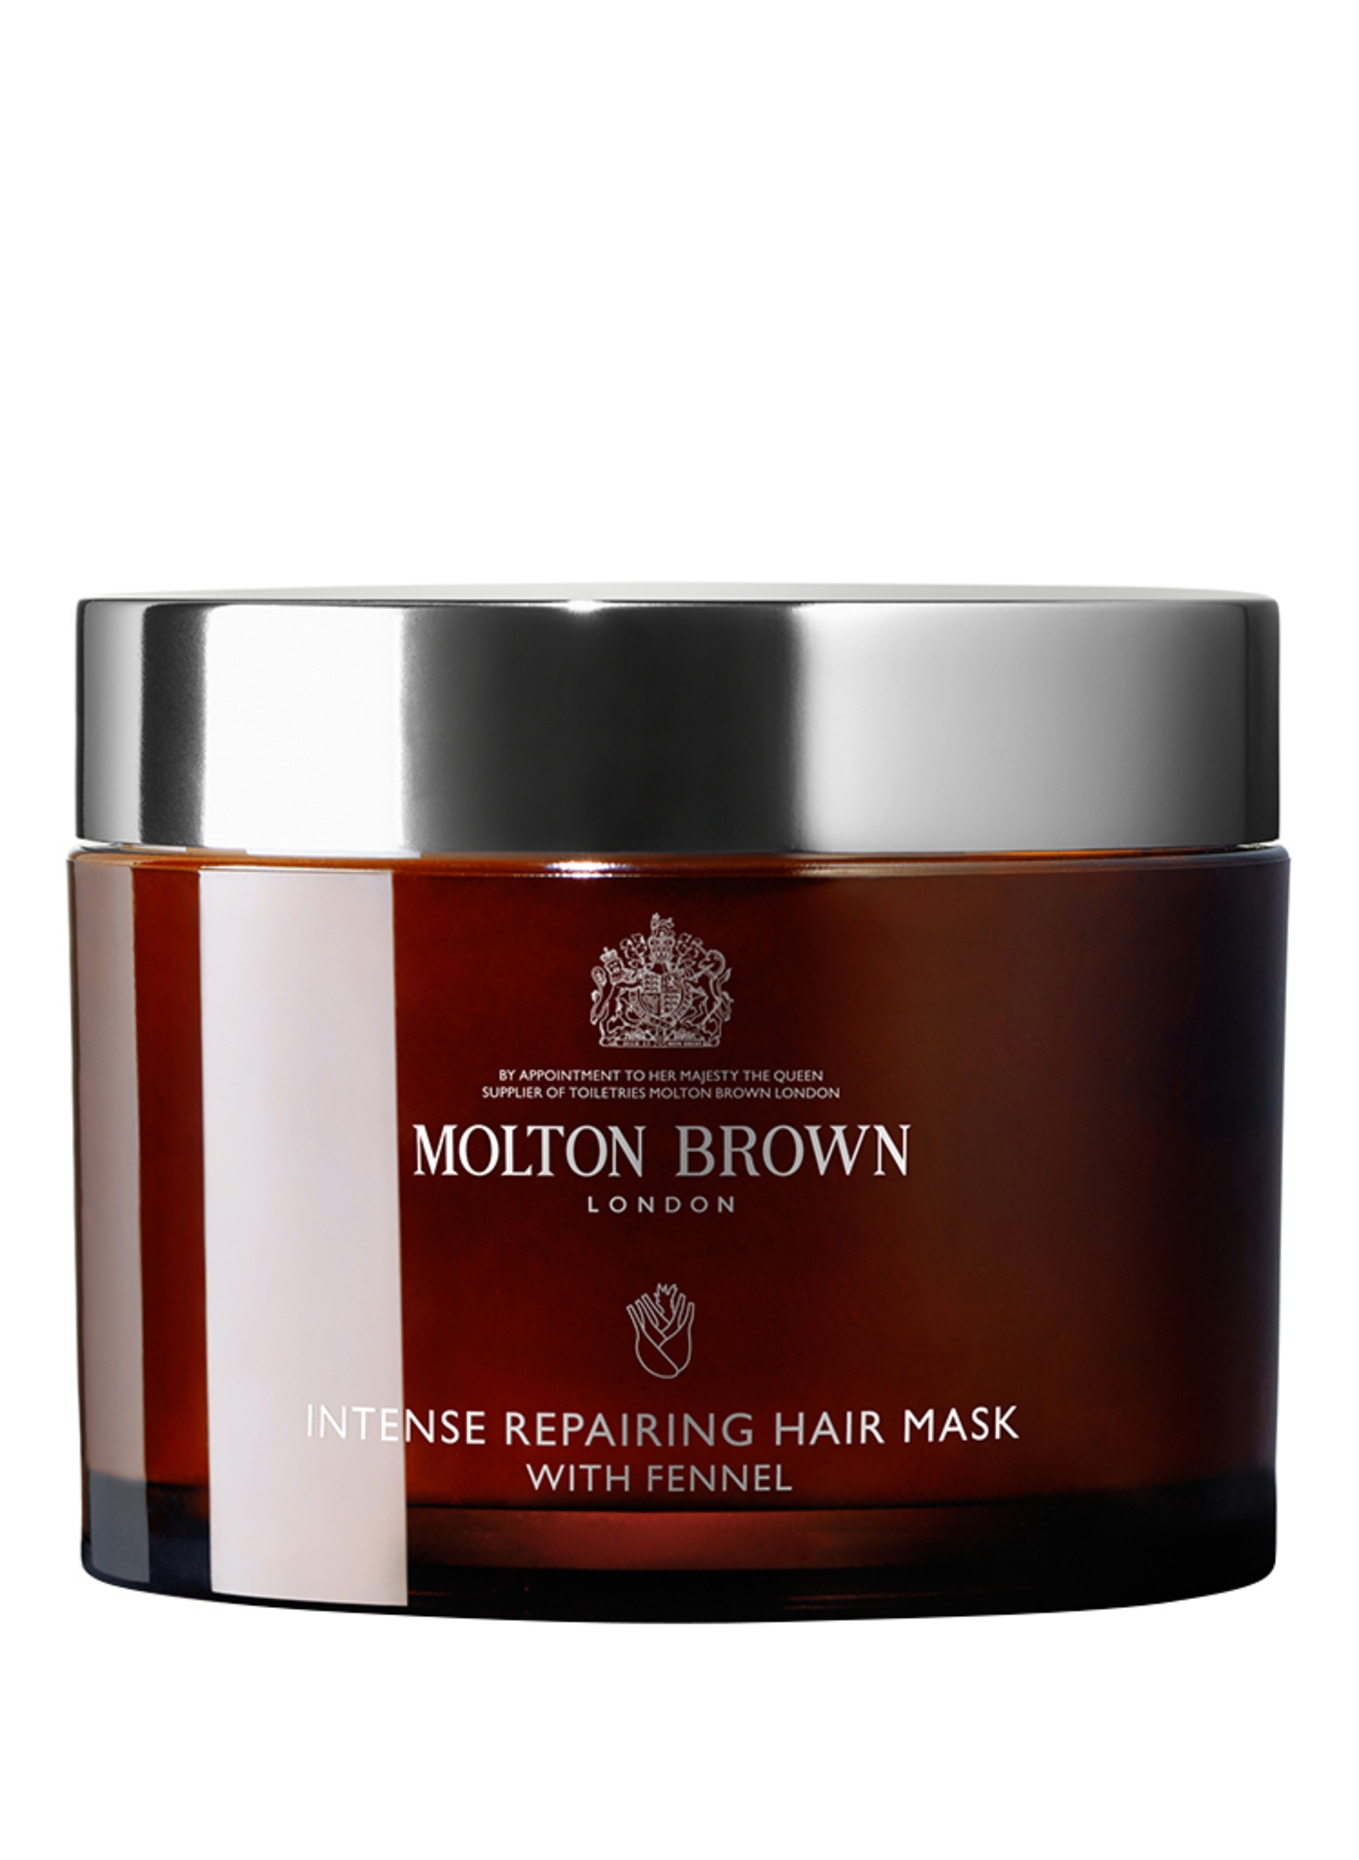 MOLTON BROWN INTENSE REPAIRING HAIR MASK WITH FENNEL (Obrazek 1)